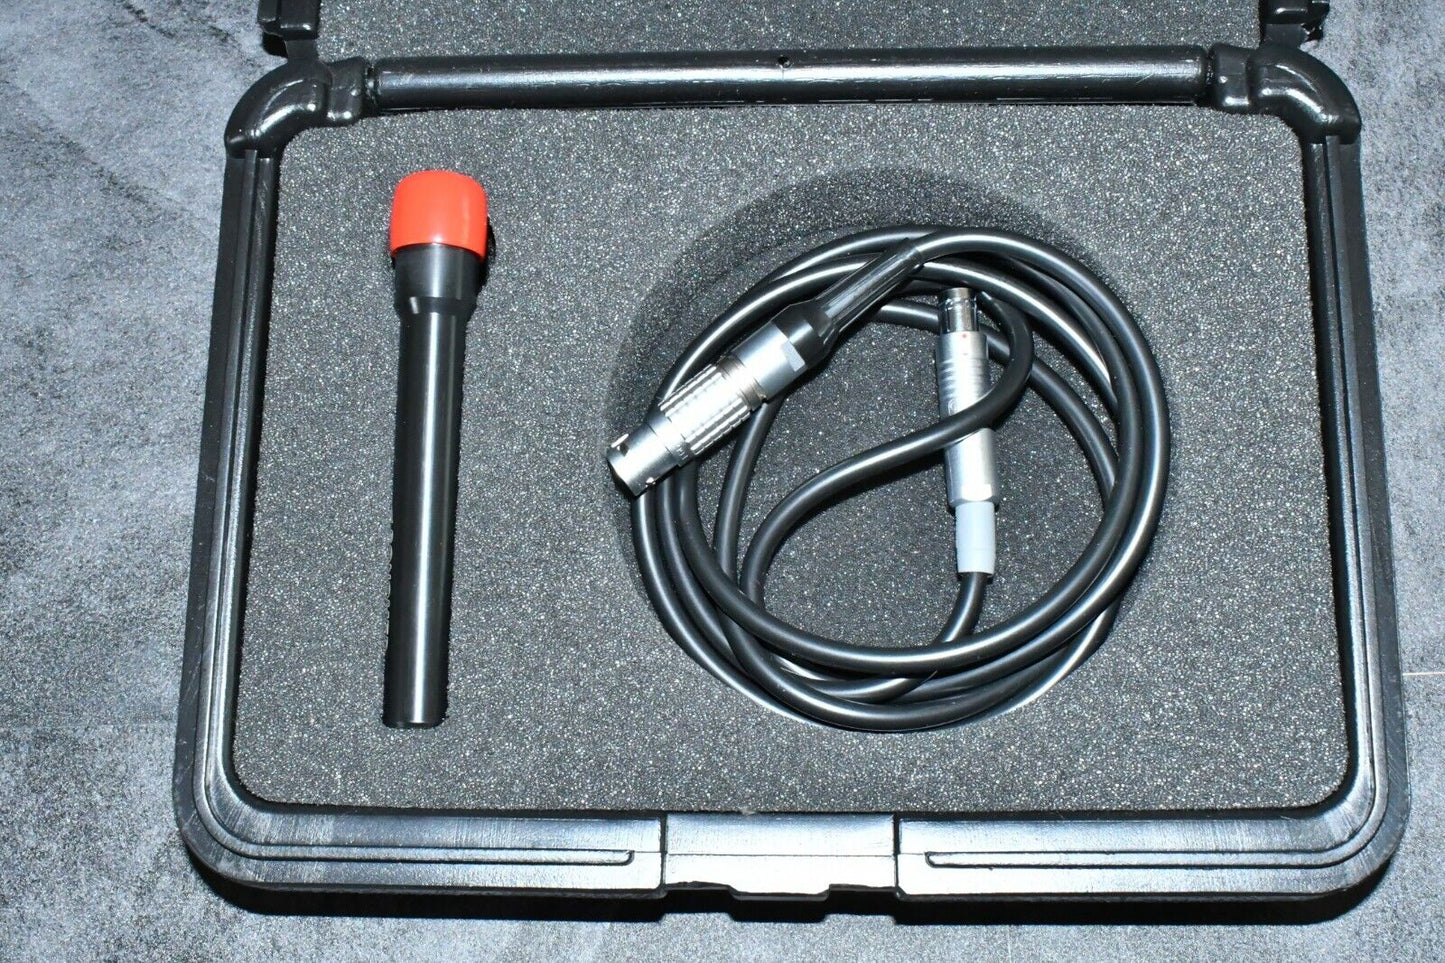 Sonomed Ophthalmic ultrasound B Scan probe 10 MHz